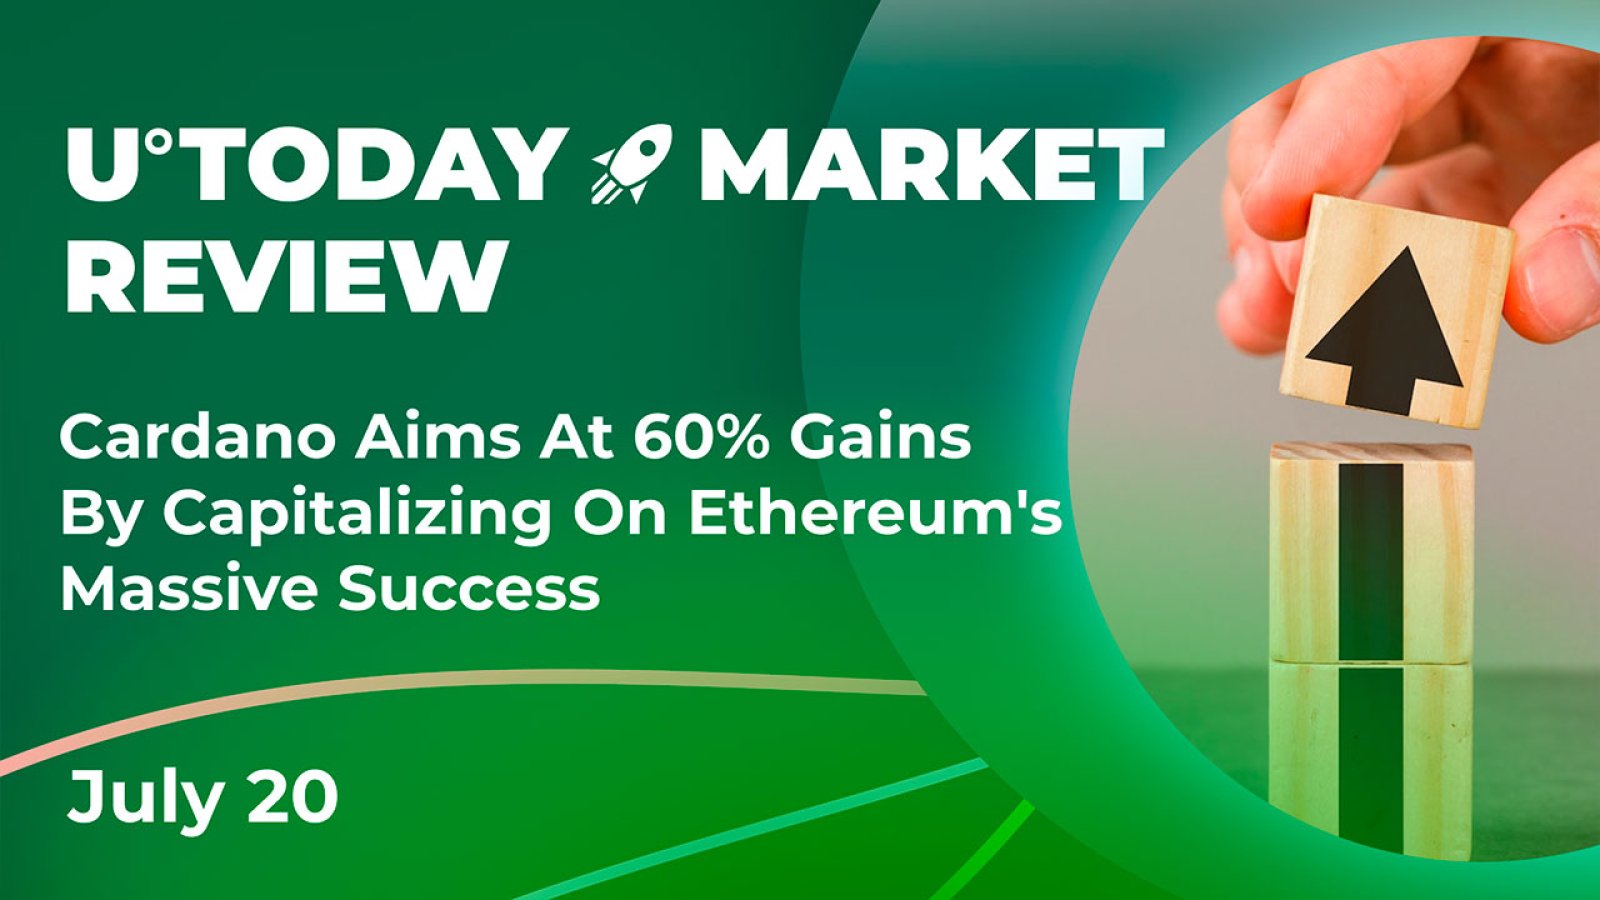 Cardano Aims at 60% Gains by Capitalizing on Ethereum's Massive Success: Cryptocurrency Market Review, June 20